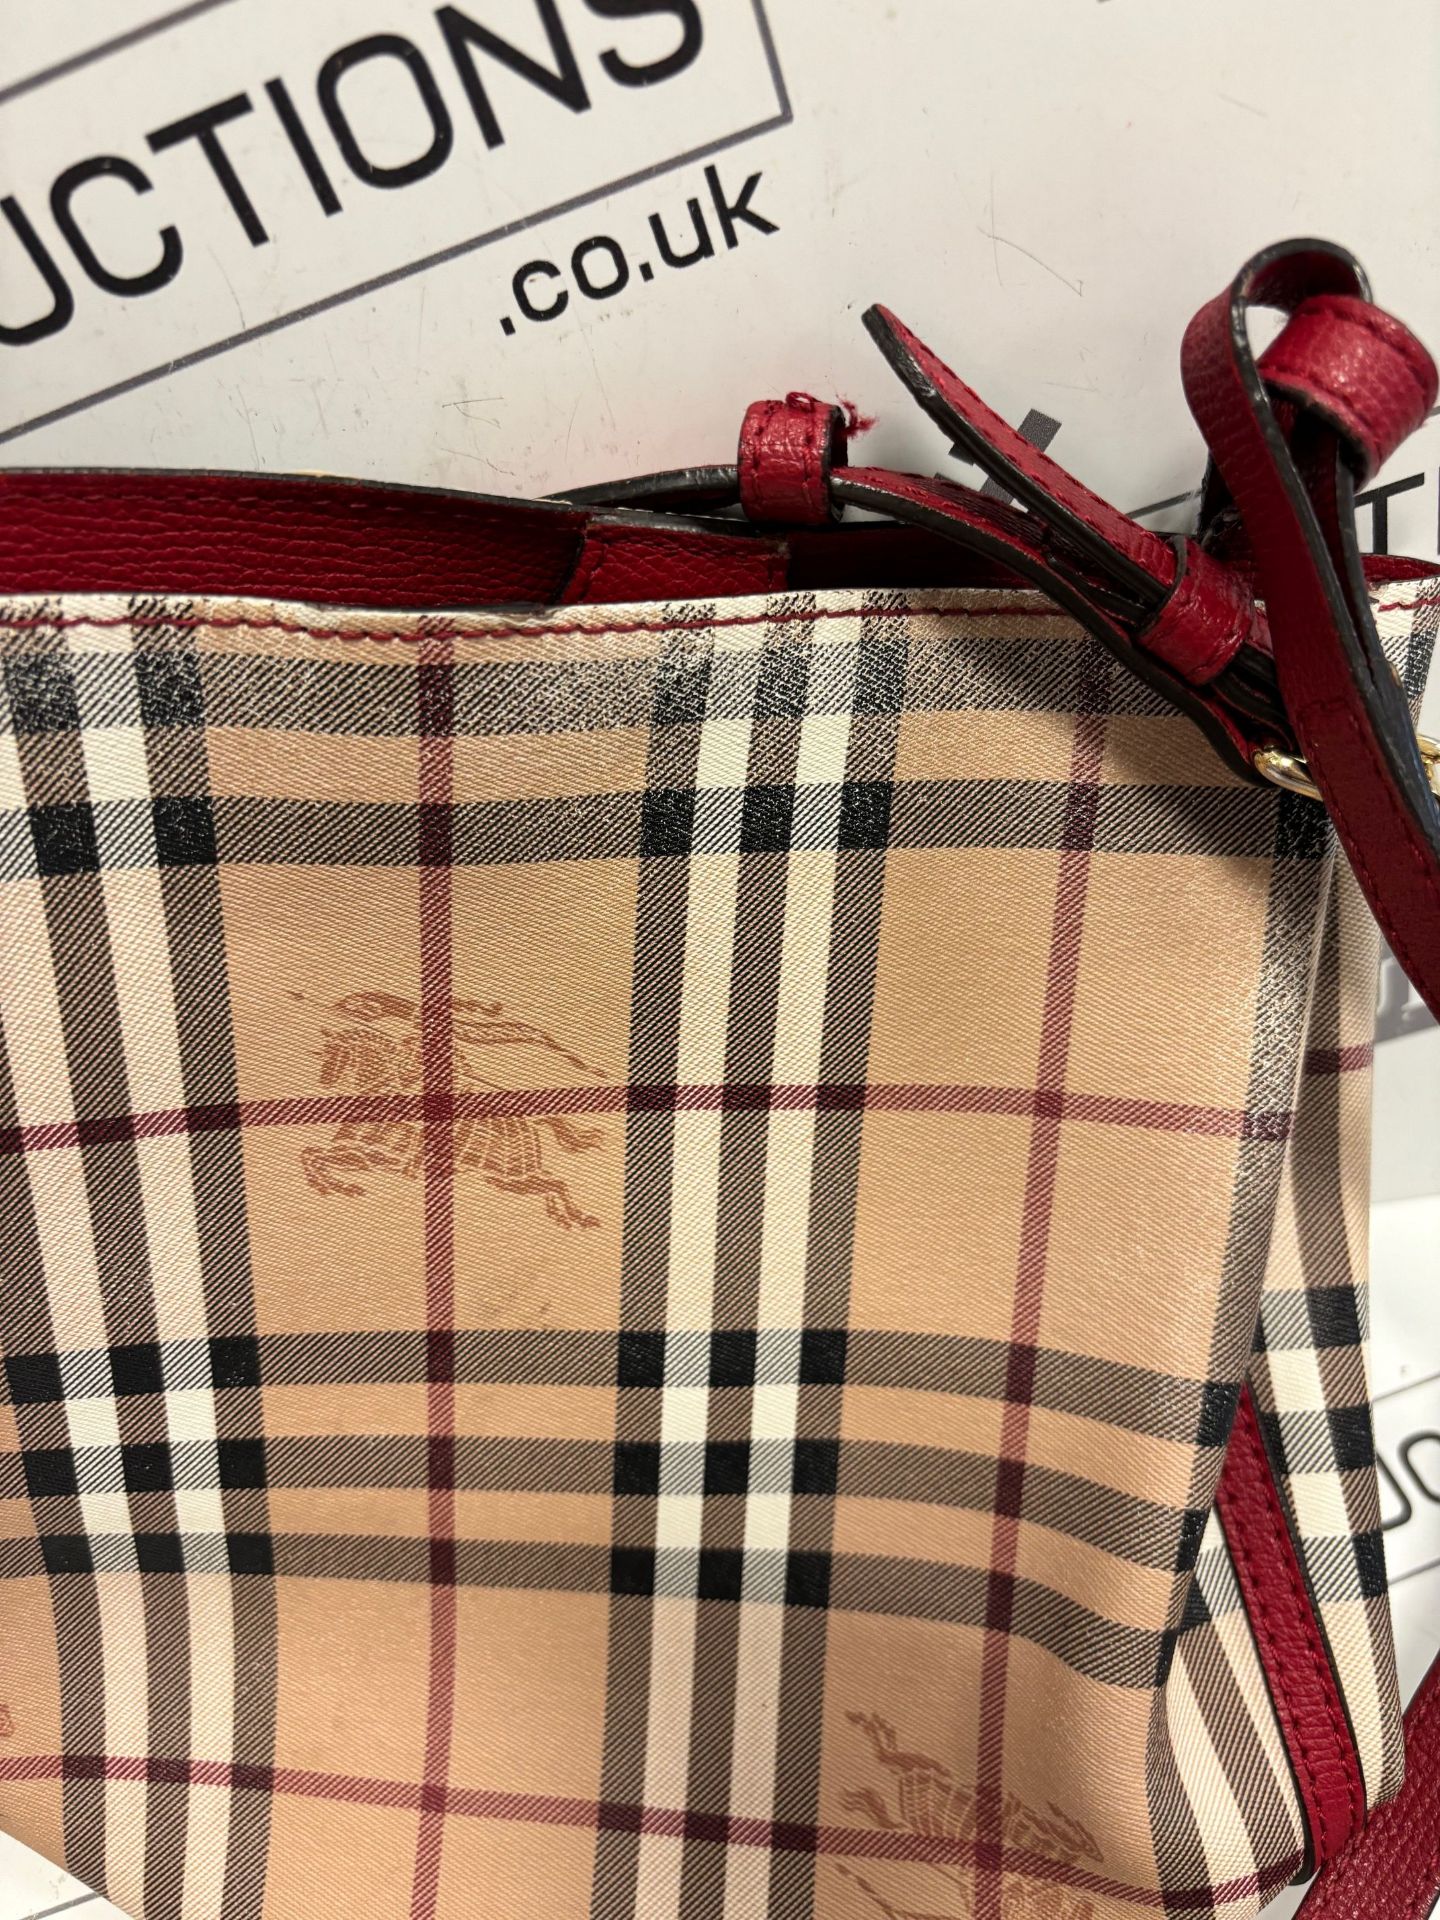 (No Vat) Burberry Leather And Haymarket Check Crossbody Bucket Bag Poppy Red approx 23x22cm. - Image 6 of 10